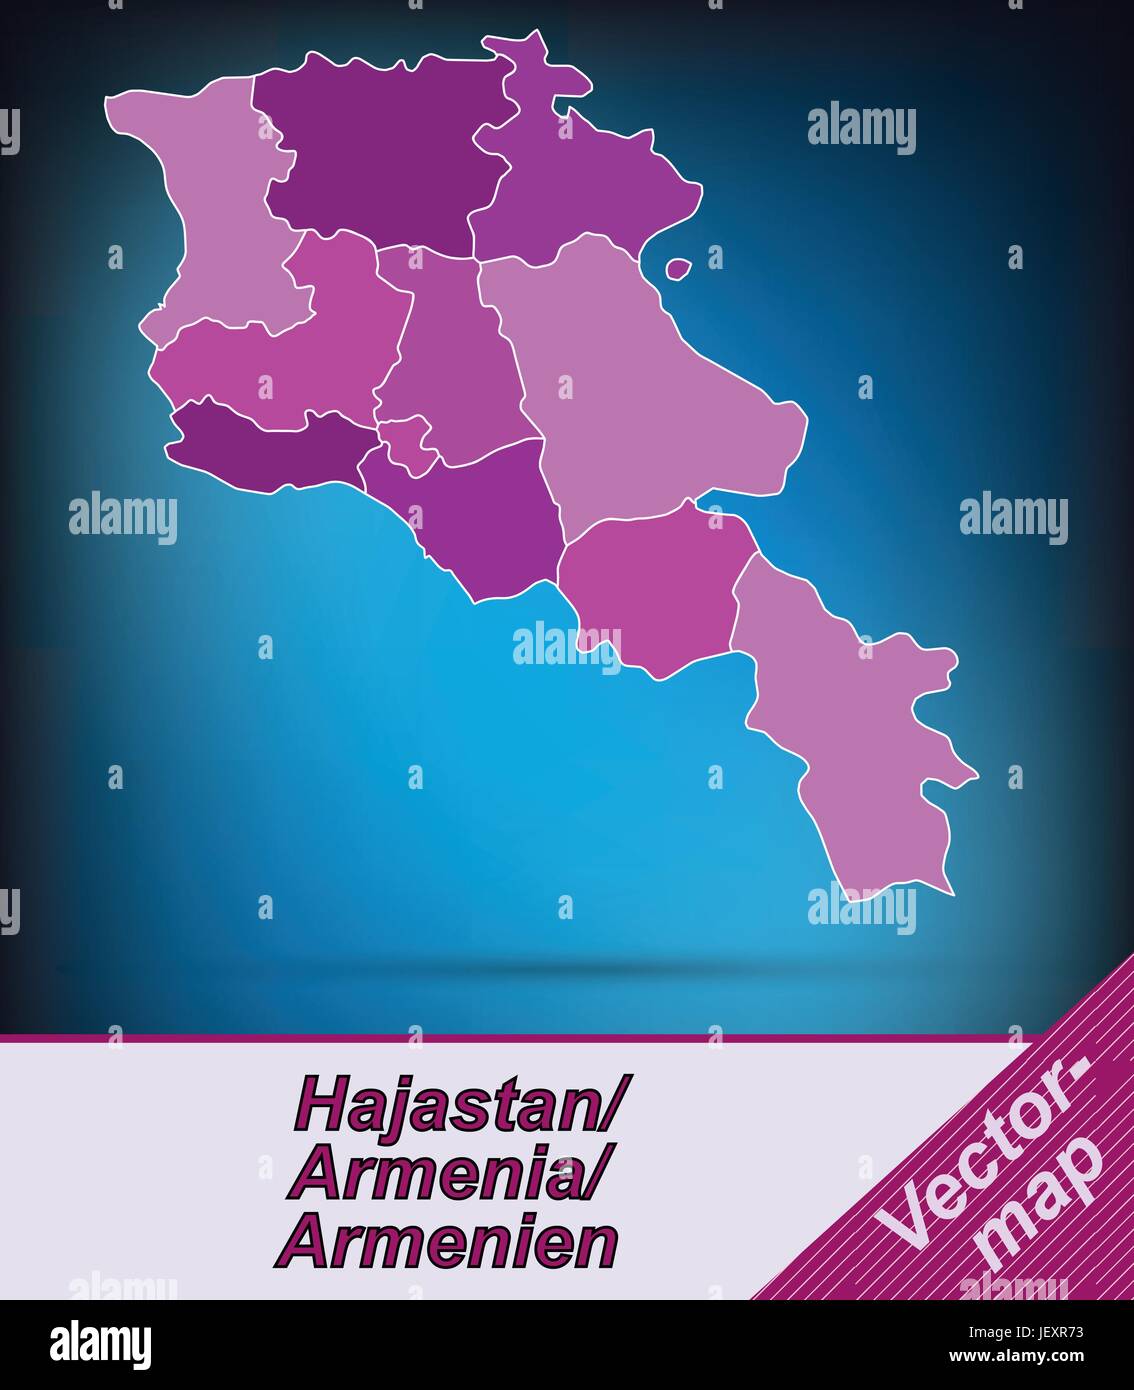 border map of armenia with borders in violet Stock Vector